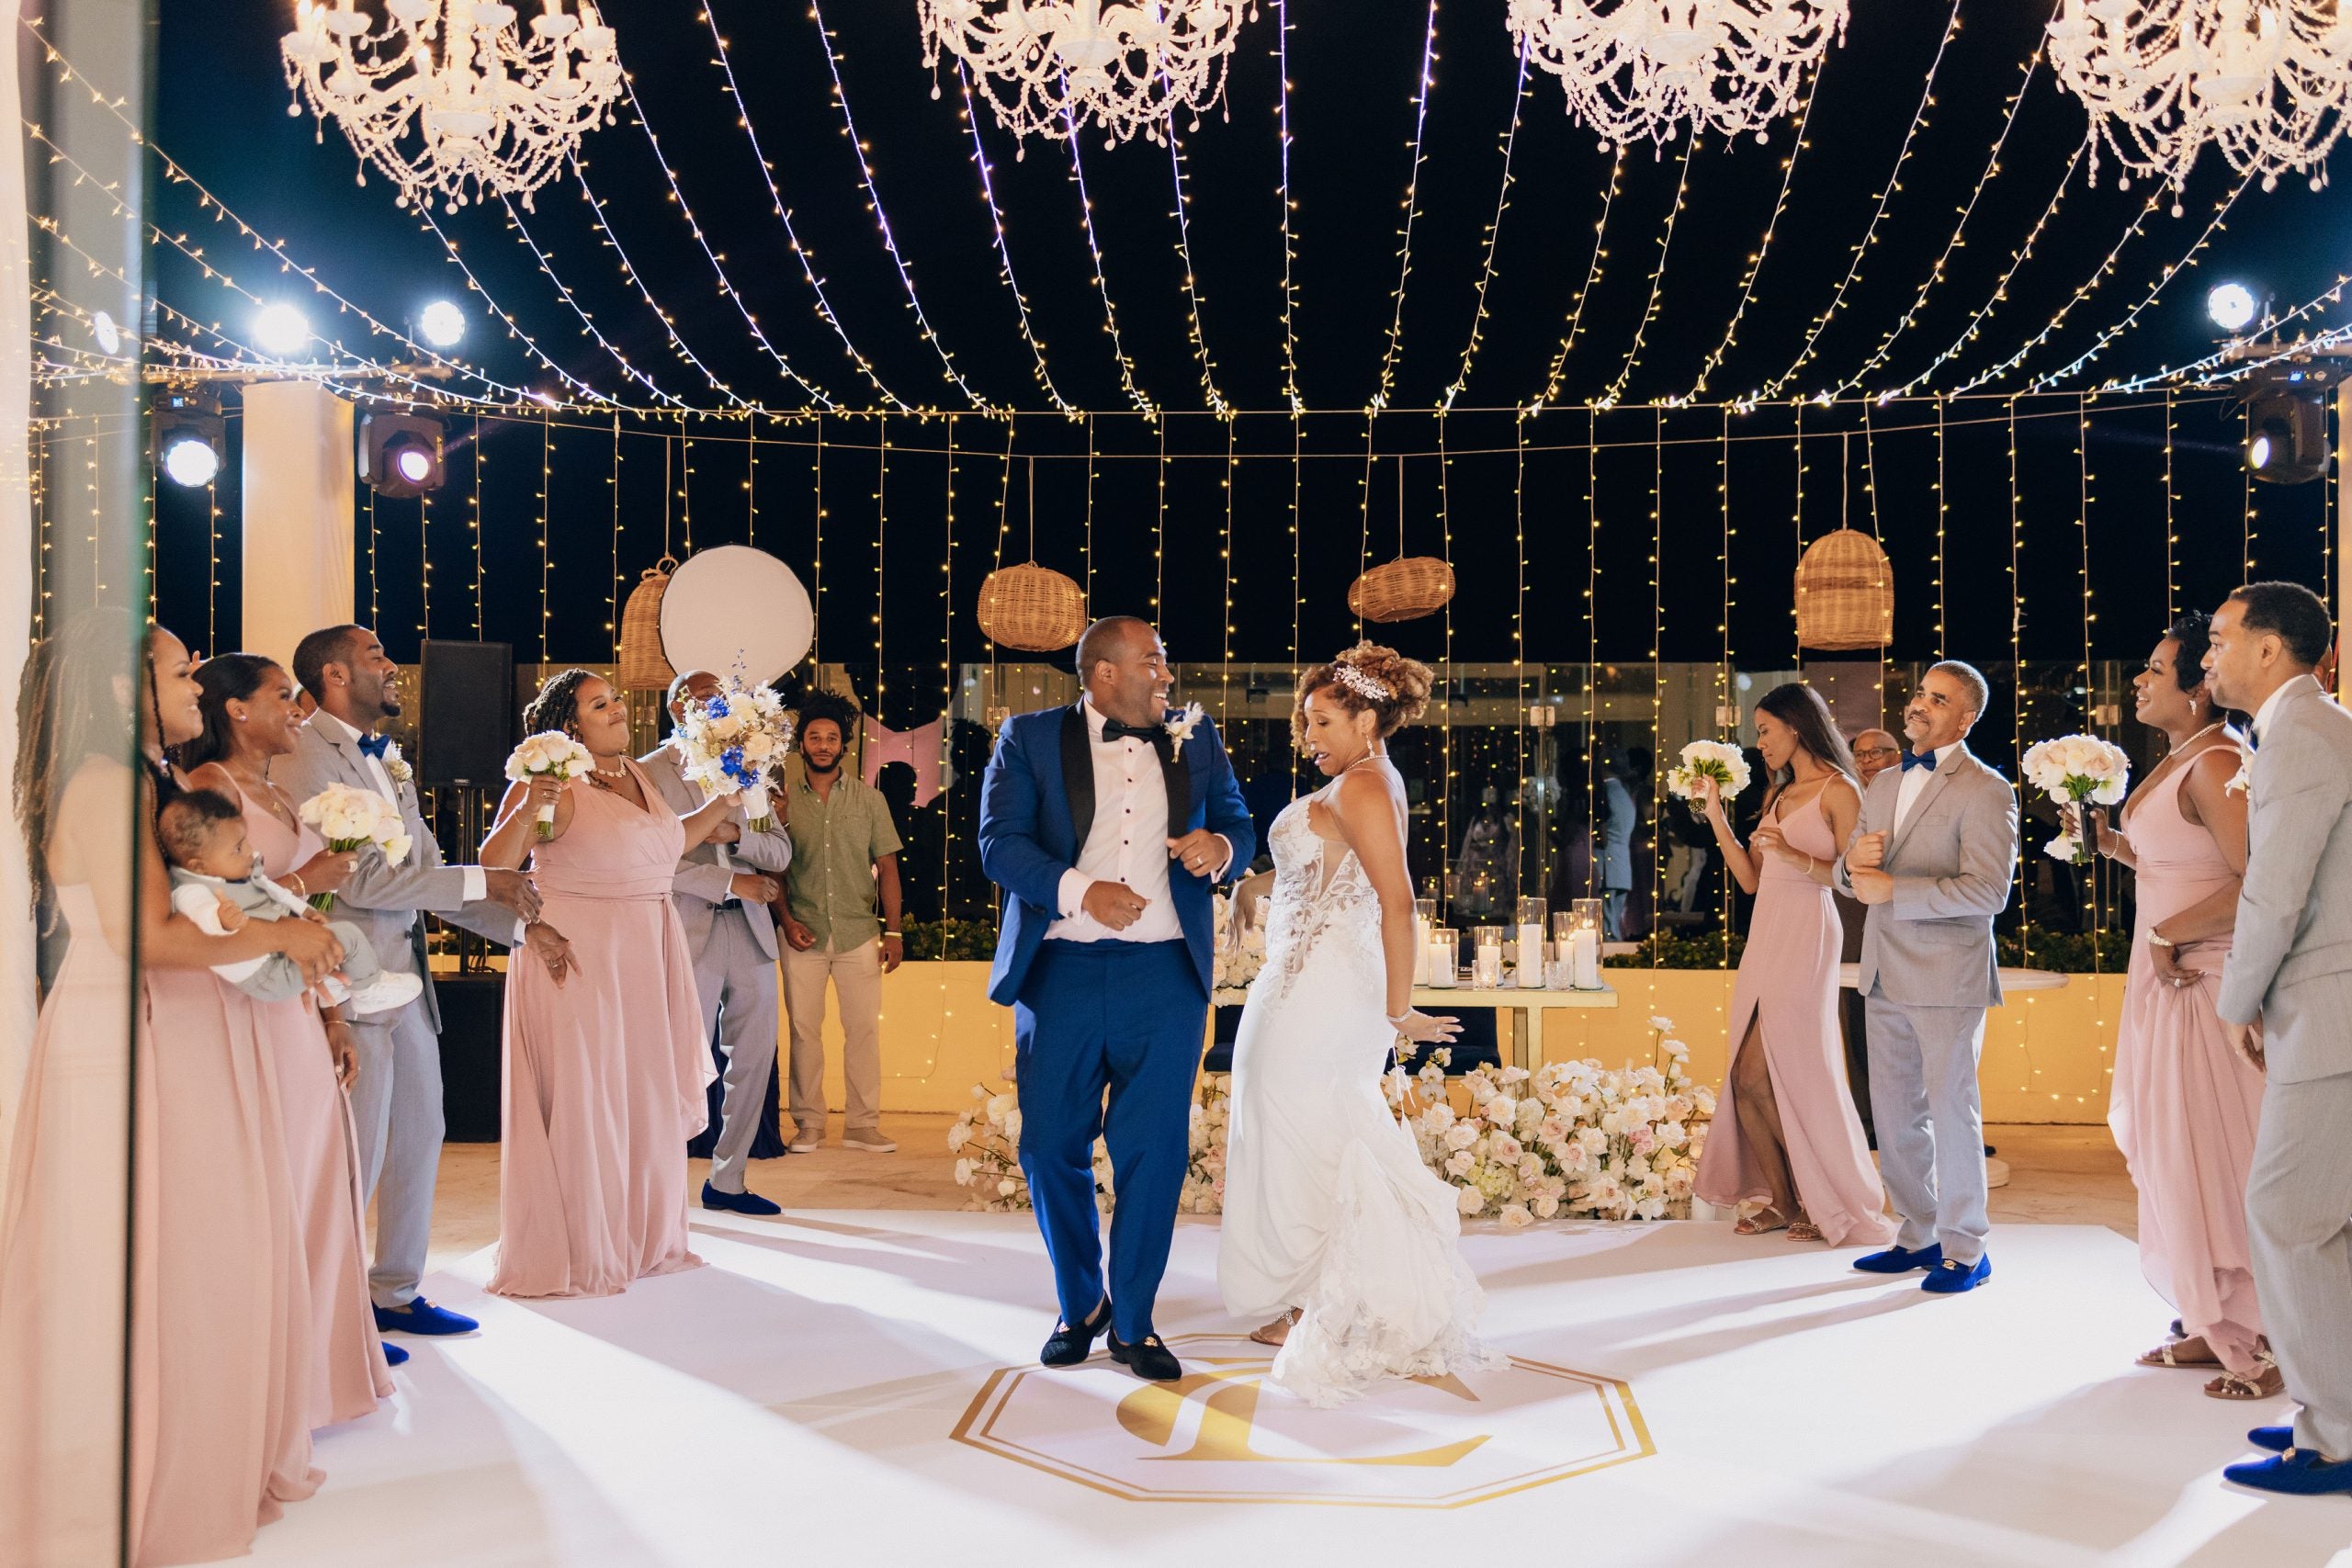 Bridal Bliss: Lori And Che’s Destination Wedding In Playa Del Carmen Was A Lavish Celebration And Vacation In One